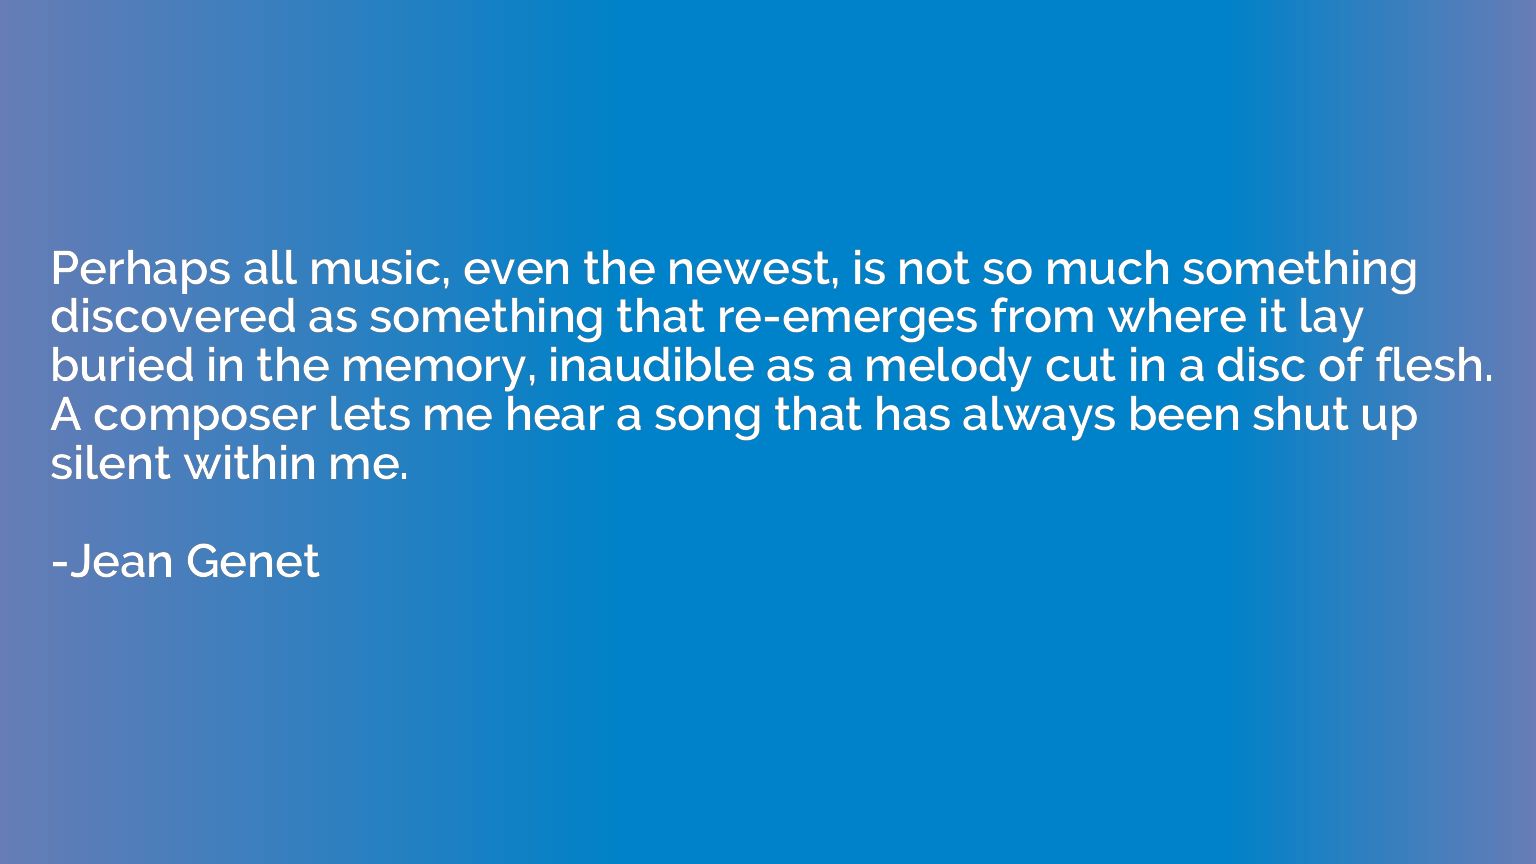 Perhaps all music, even the newest, is not so much something